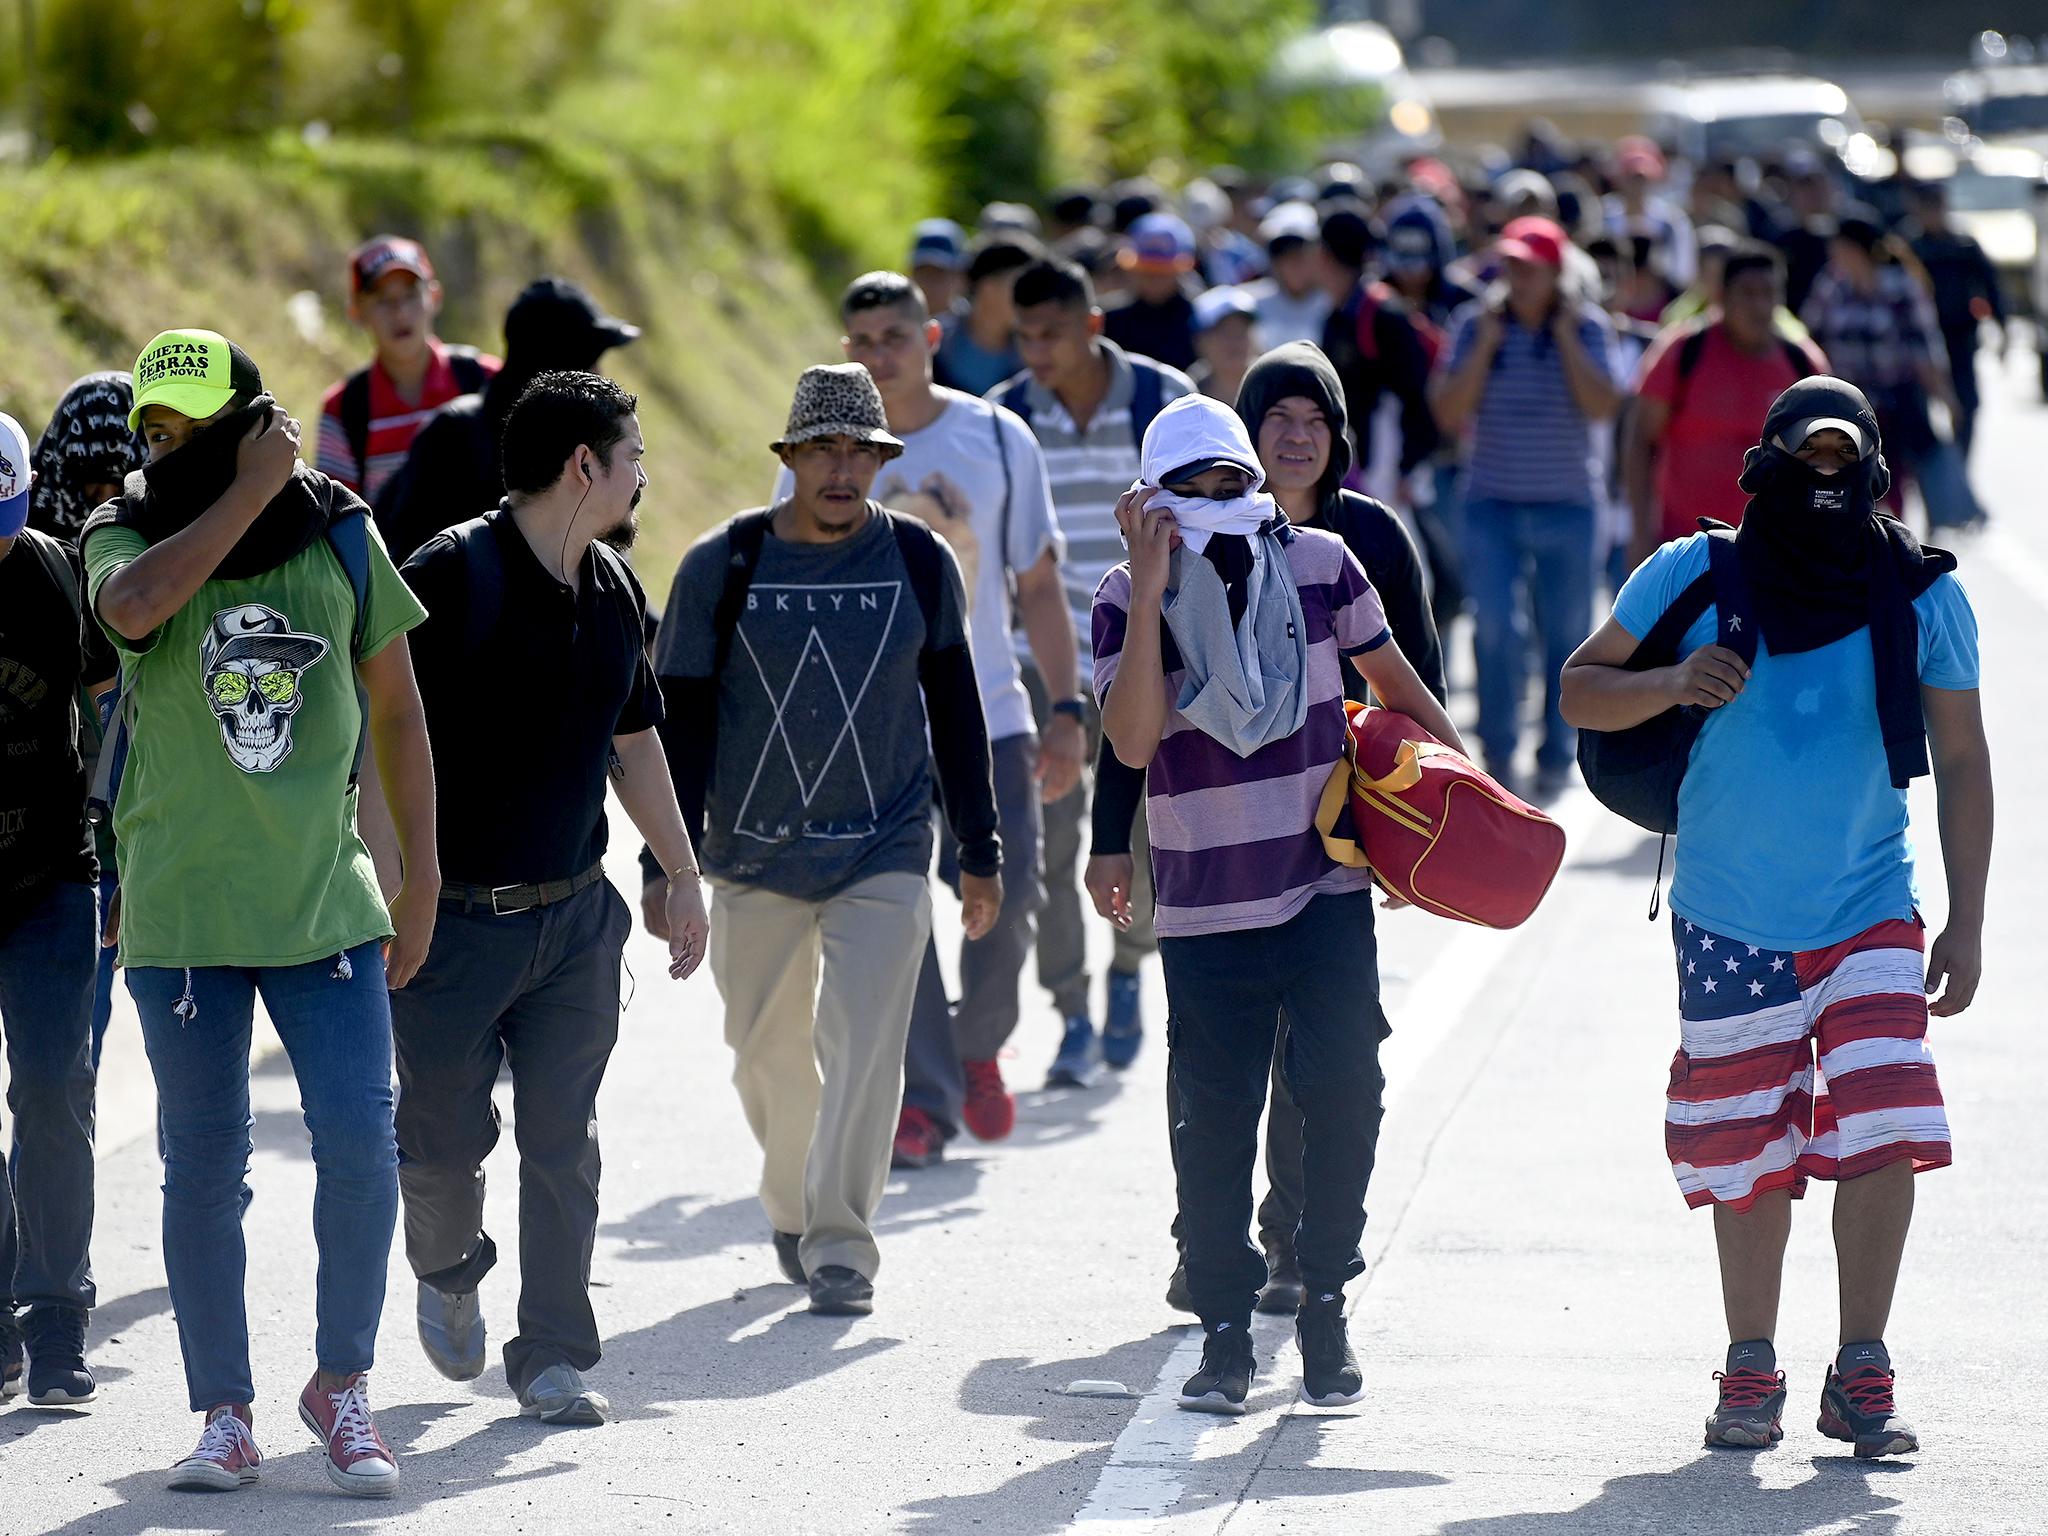 The number of Salvadorans seeking asylum in the US has risen sharply in recent years